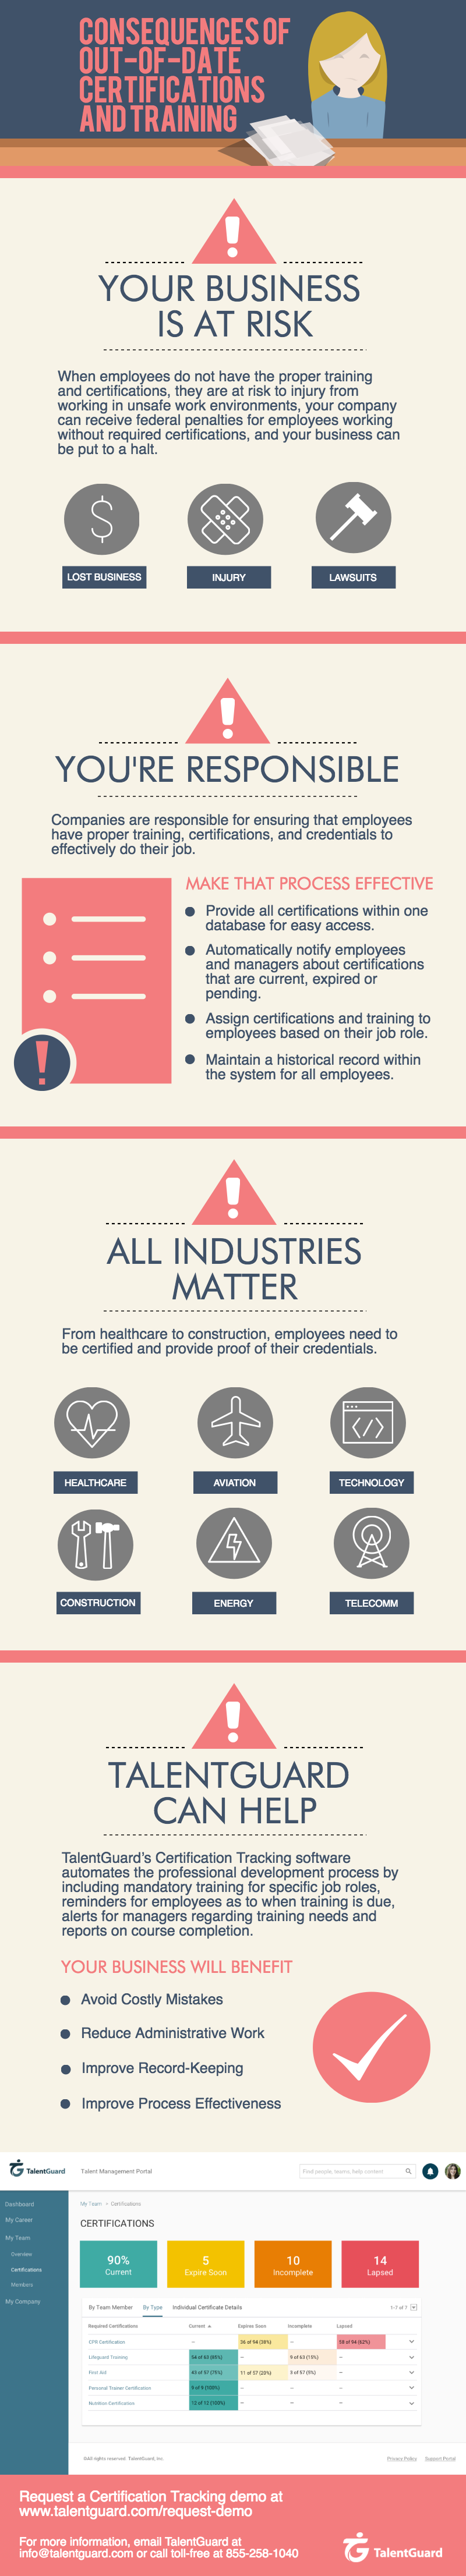 Consequences of Out-of-date certifications and Training infographic